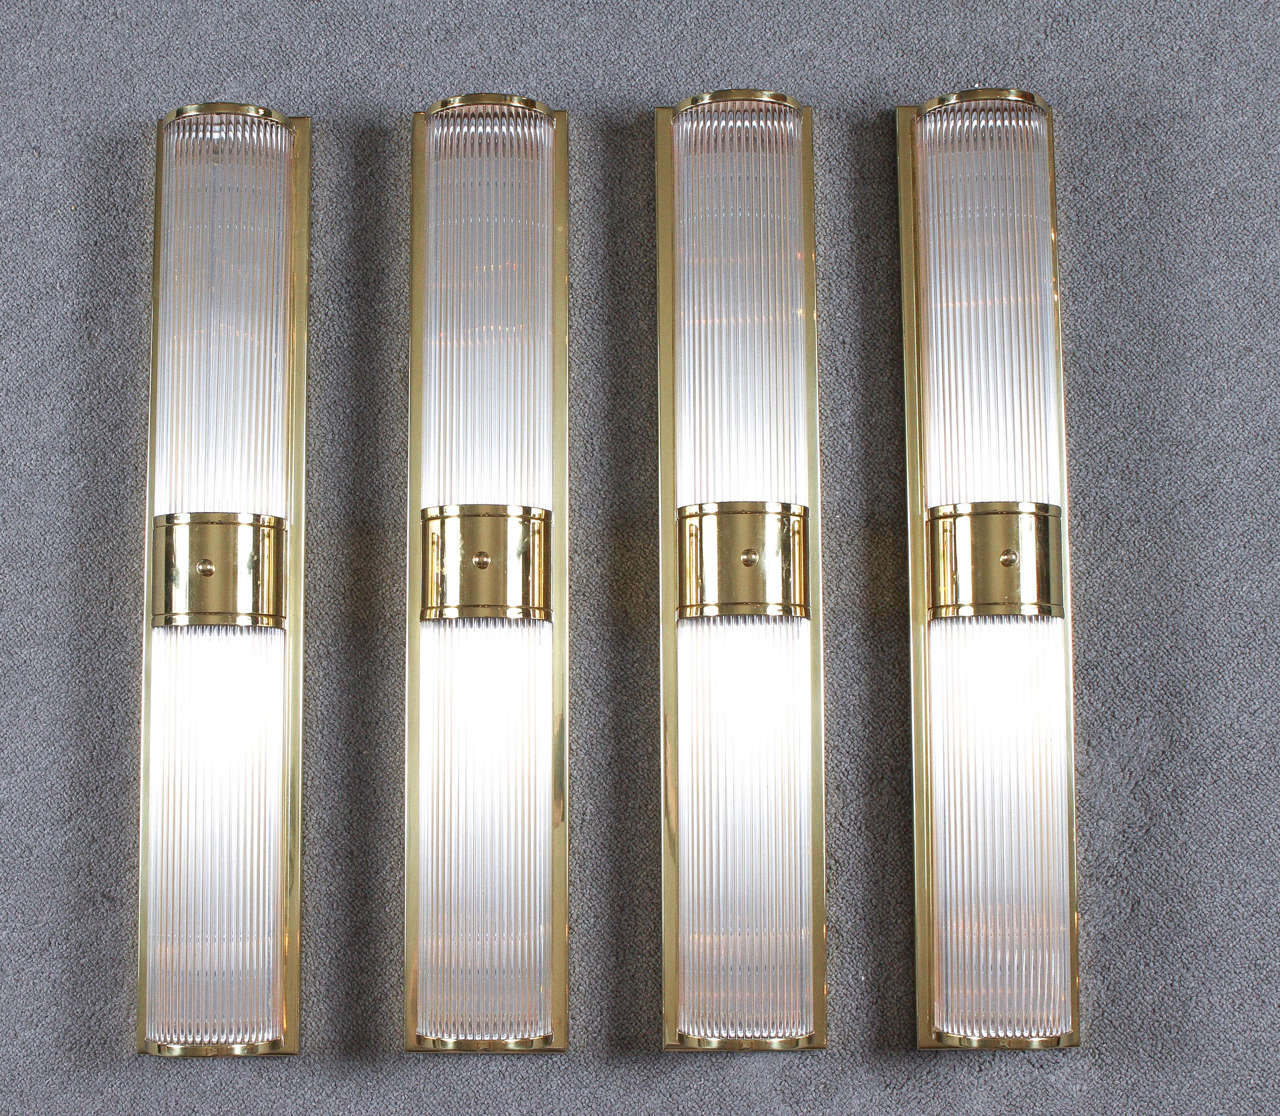 1970s elegant brass and glass rod sconces by Gaetano Sciolari.
The polished brass frames hold thin glass rod tubes through which the light shines beautifully. They are priced by the pair.
(Two Pairs Available).